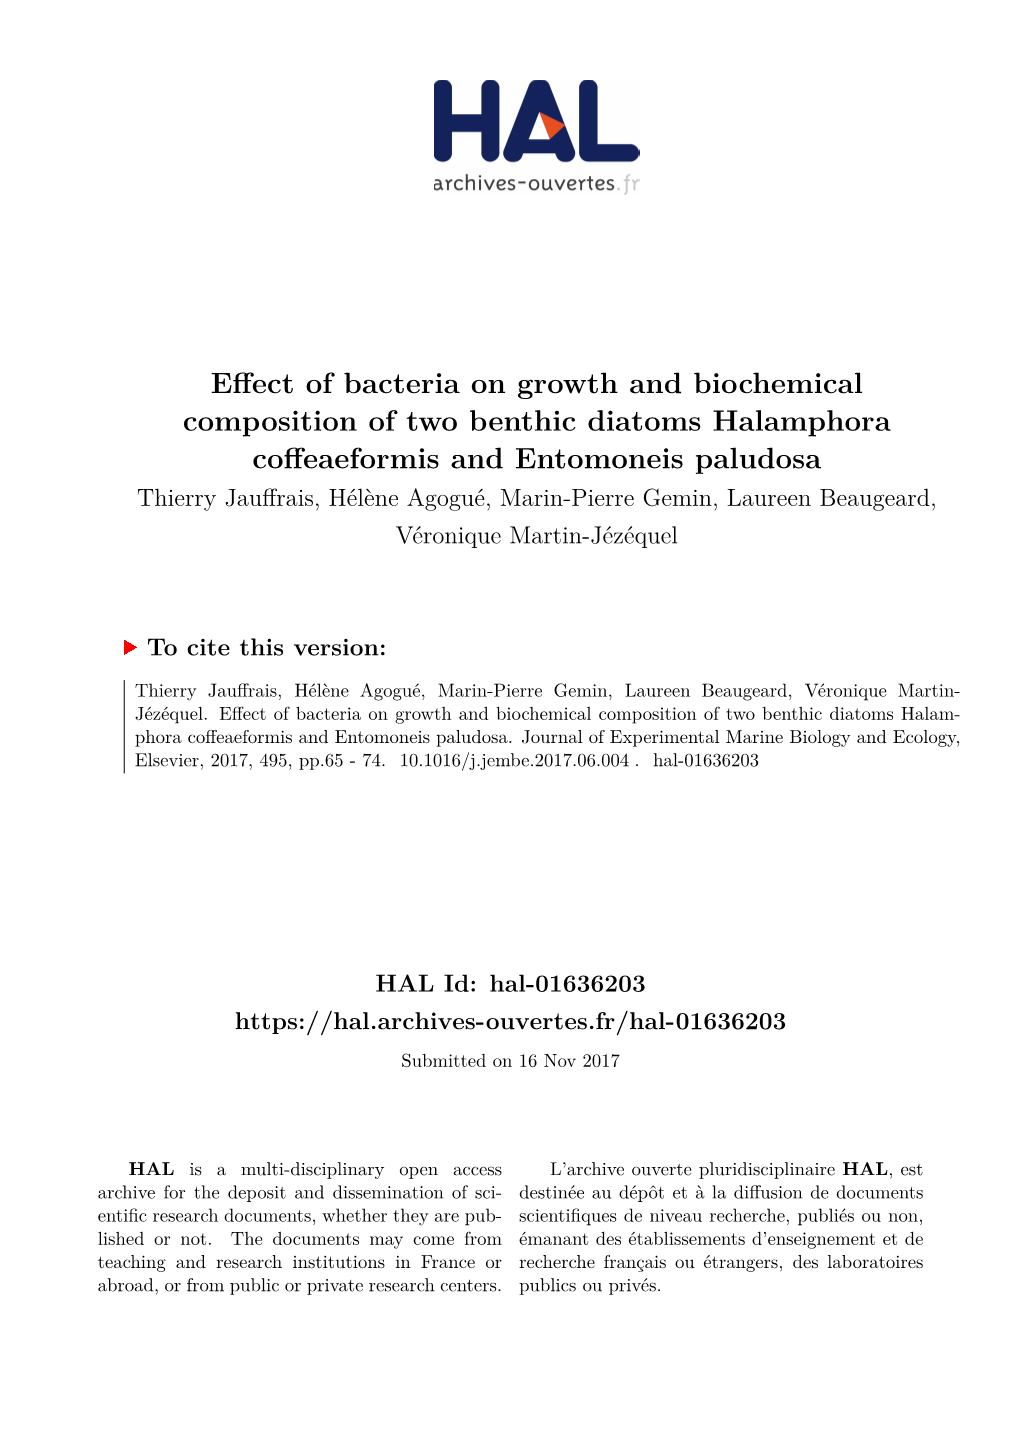 Effect of Bacteria on Growth and Biochemical Composition of Two